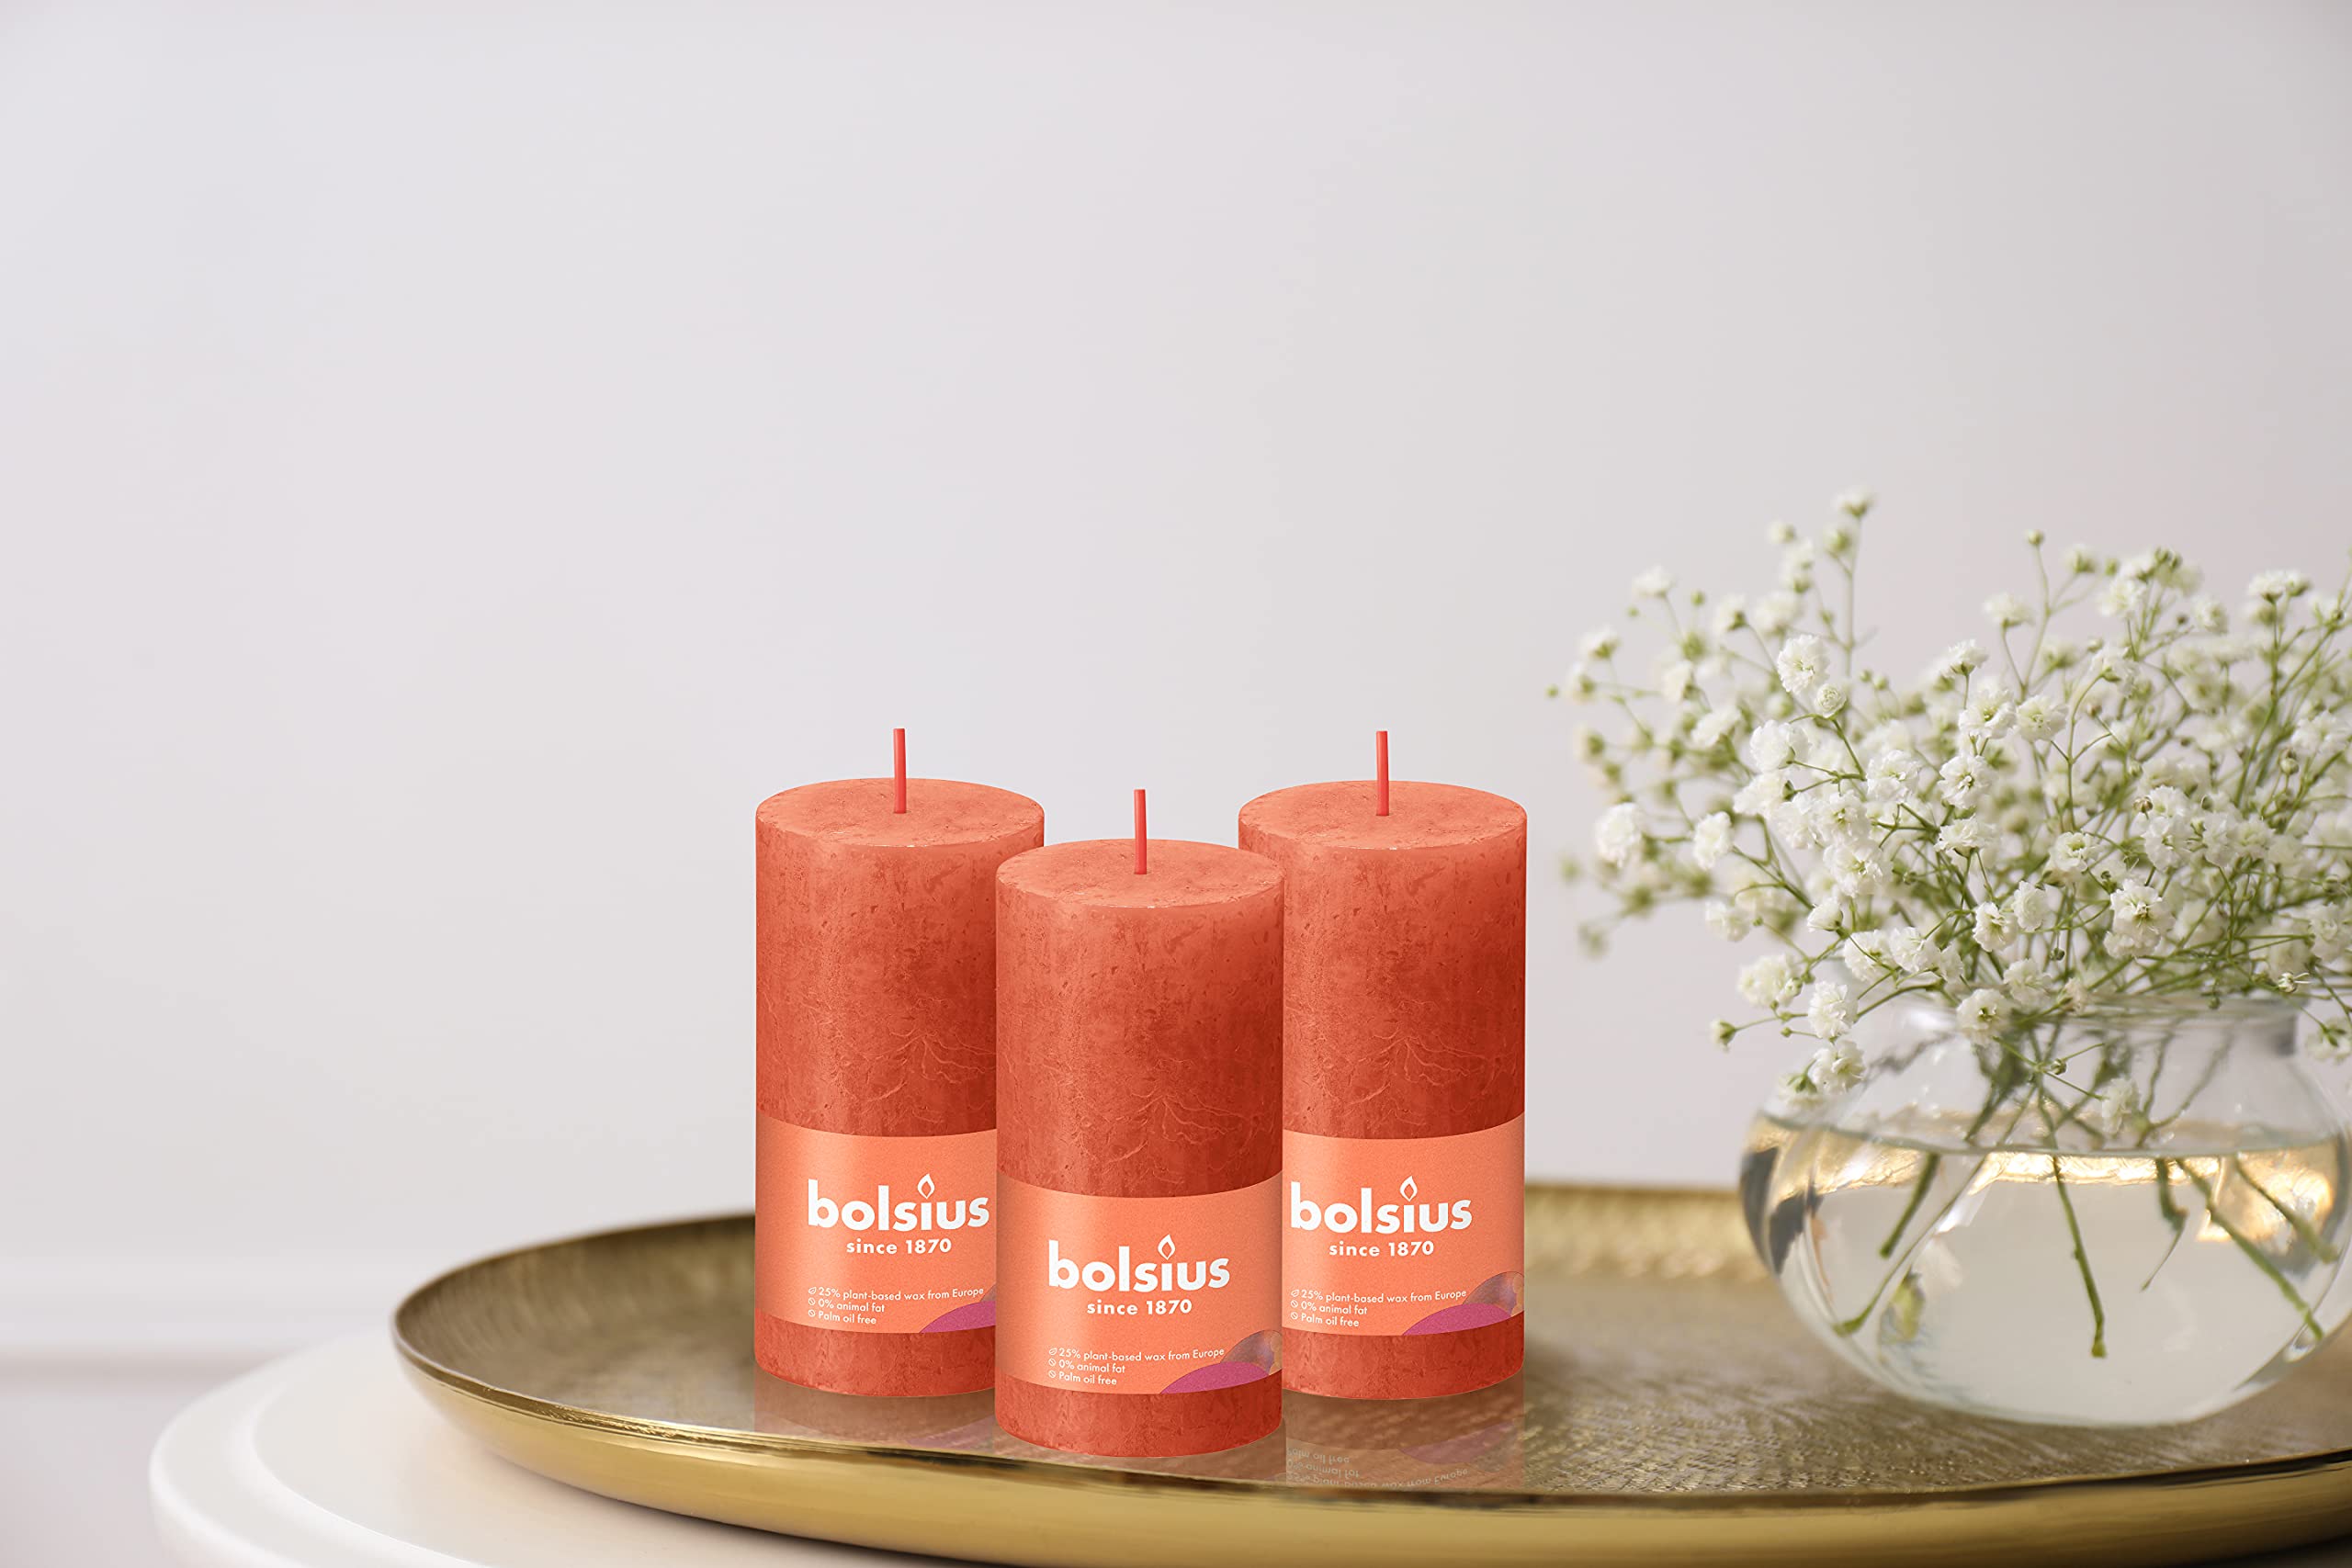 BOLSIUS 4 Pack Orange Rustic Pillar Candles - 2 X 4 Inches - Premium European Quality - Includes Natural Plant-Based Wax - Unscented Dripless Smokeless 30 Hour Party D�cor and Wedding Candles  - Acceptable